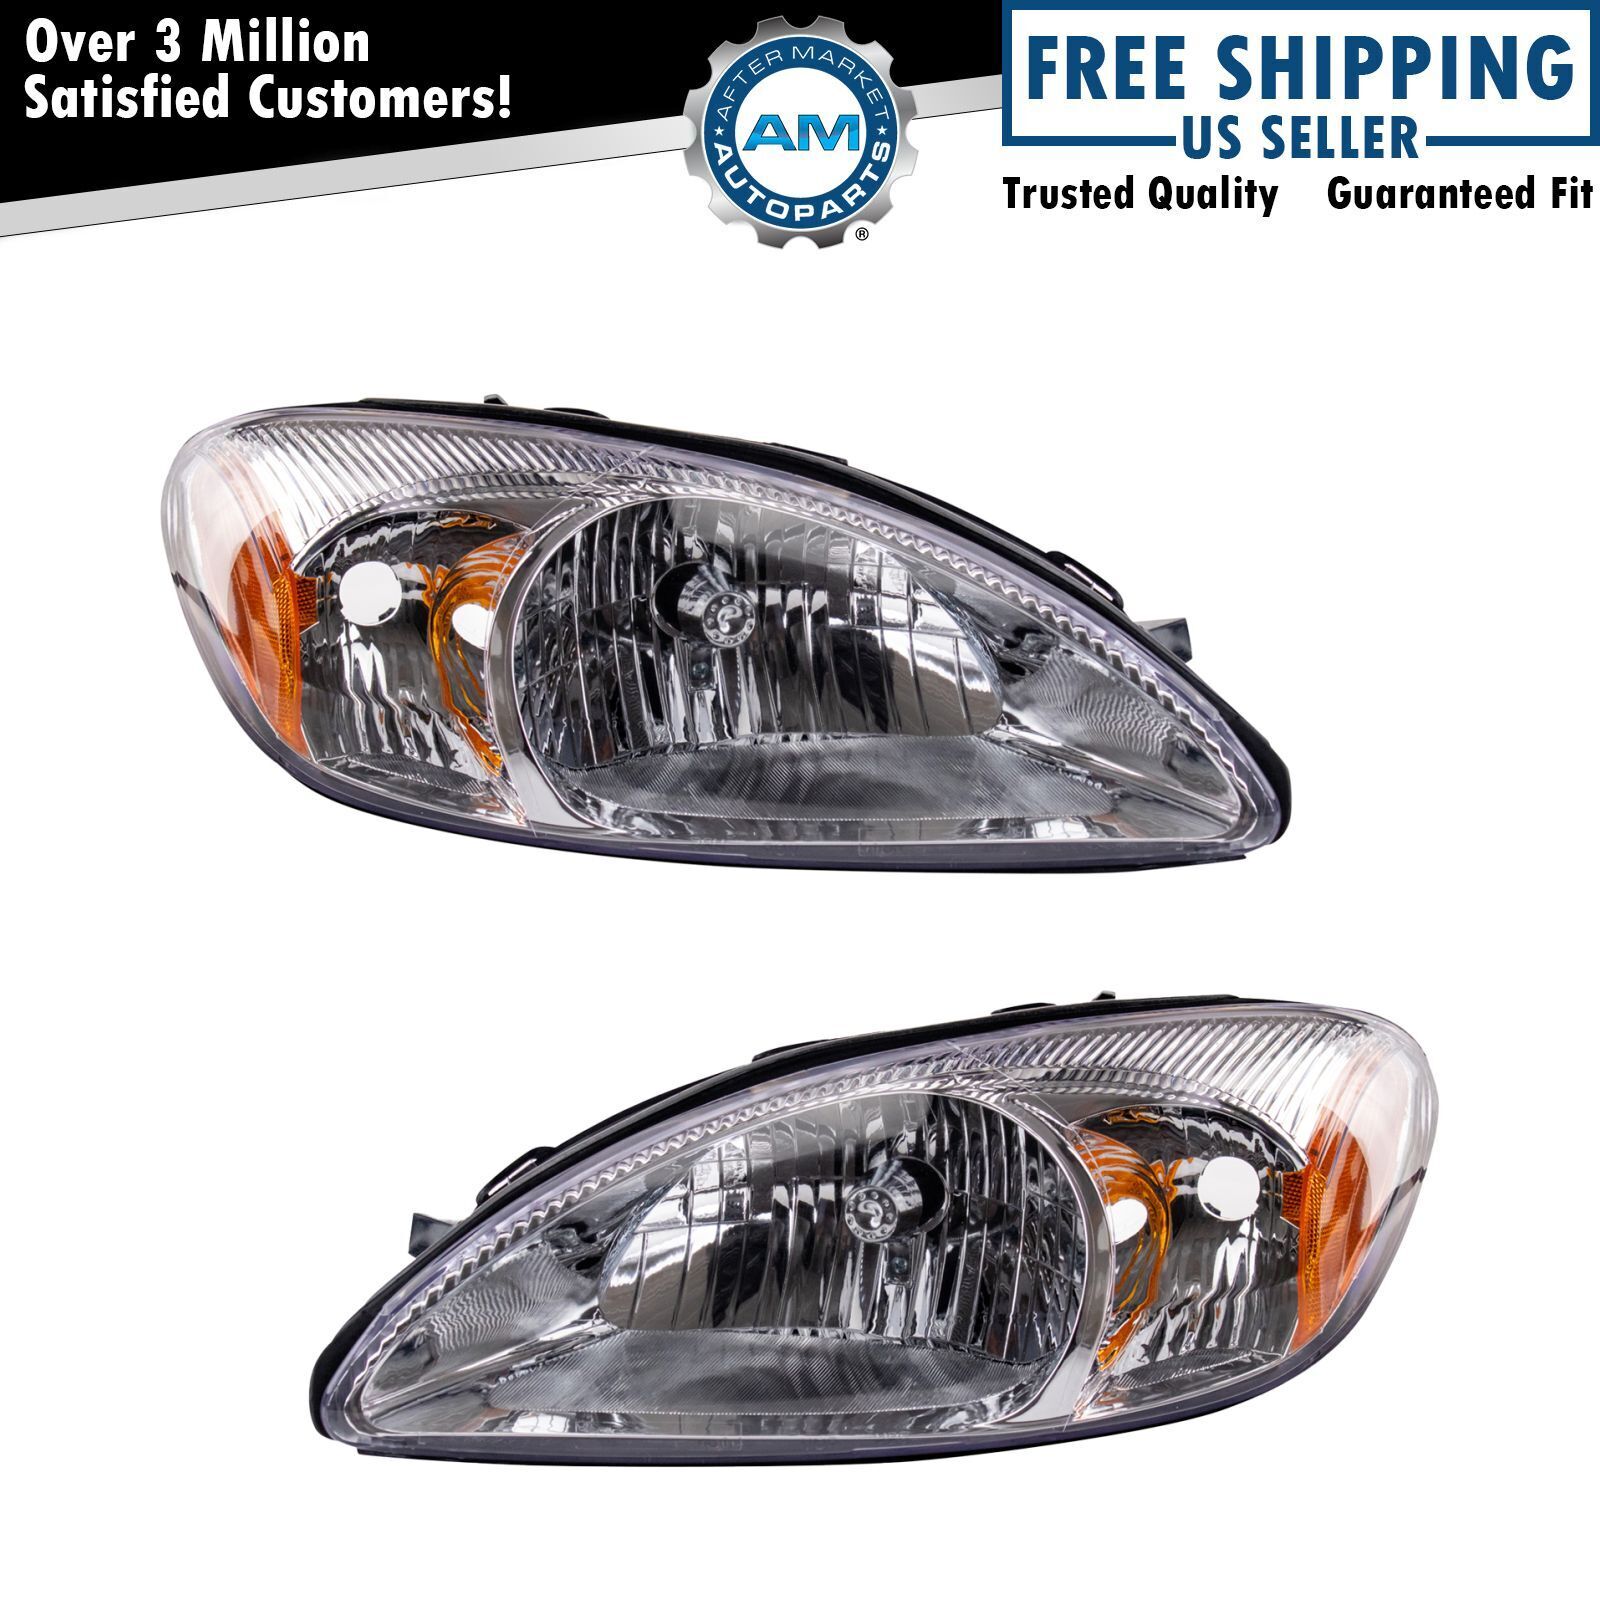 Headlight Set Left & Right For 2000-2007 Ford Taurus FO2502169 FO2503169